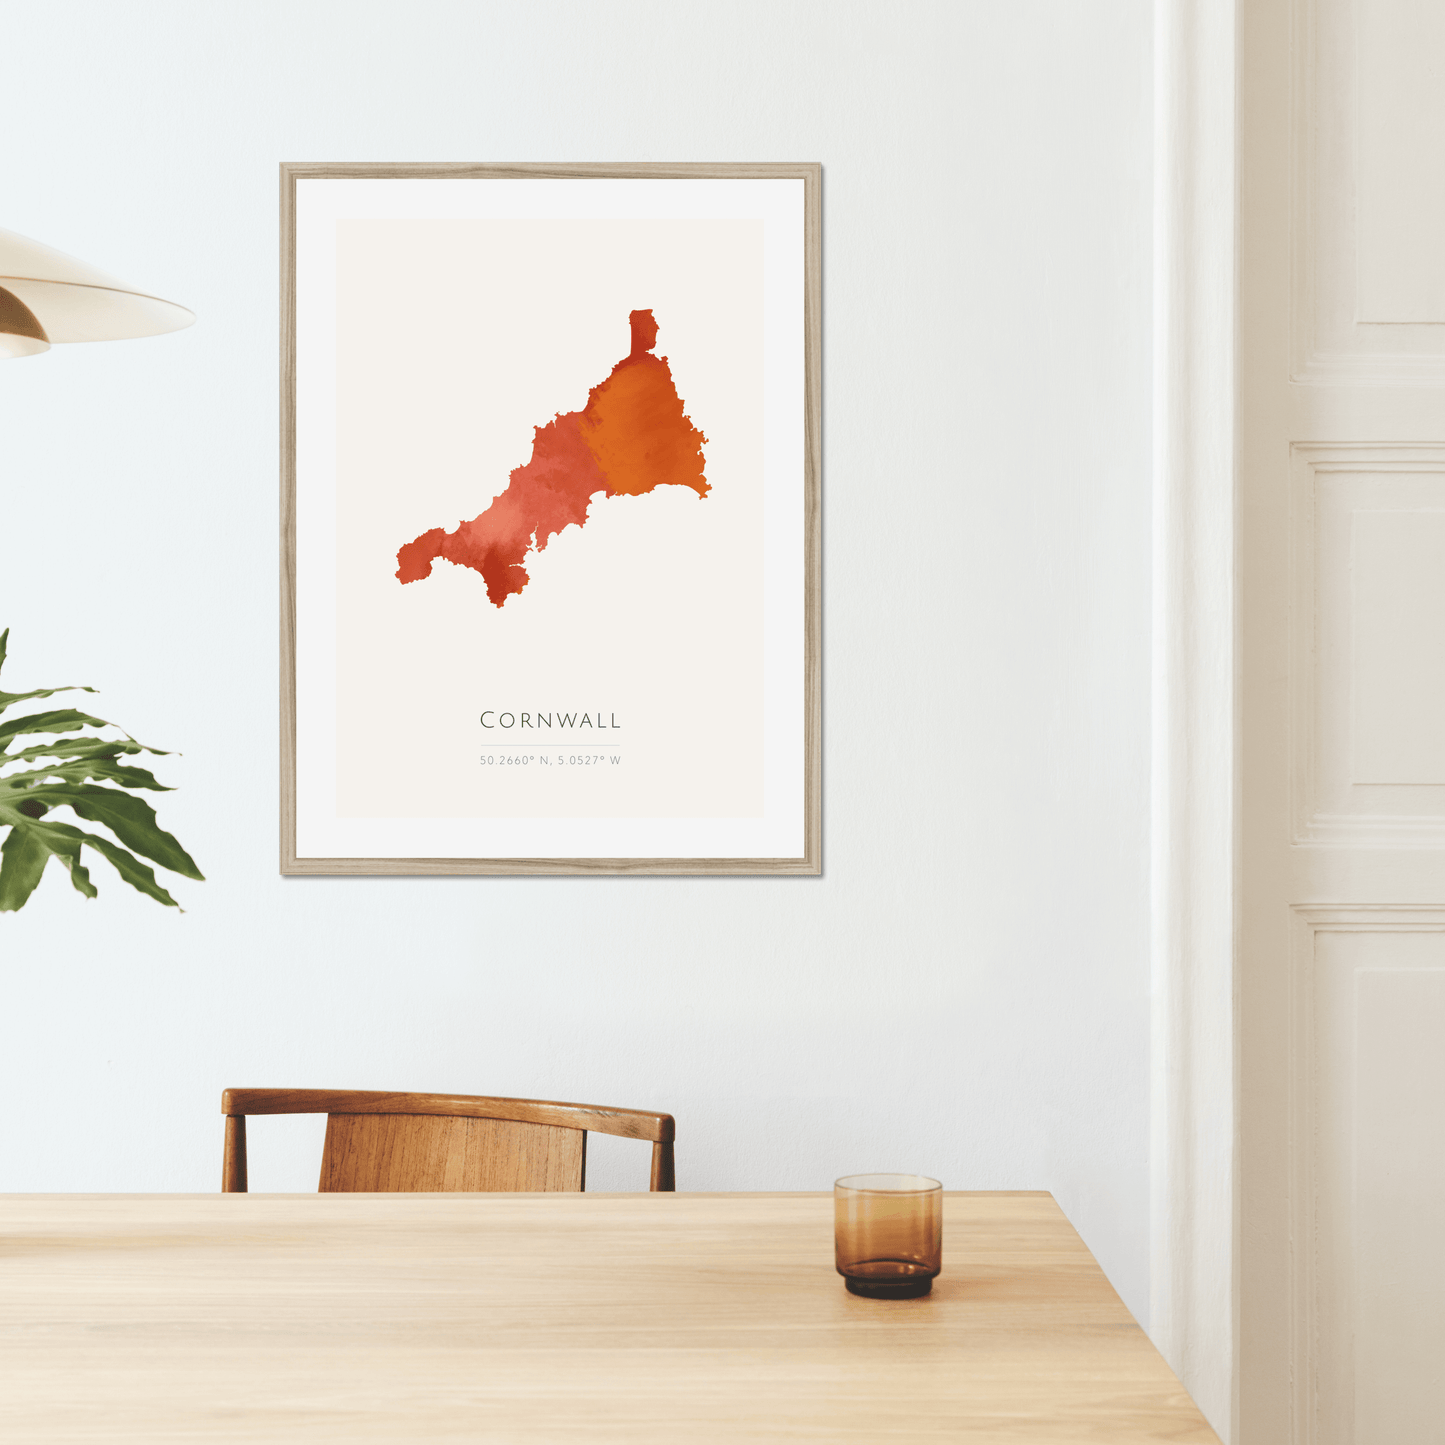 Cornwall -  Framed & Mounted Map